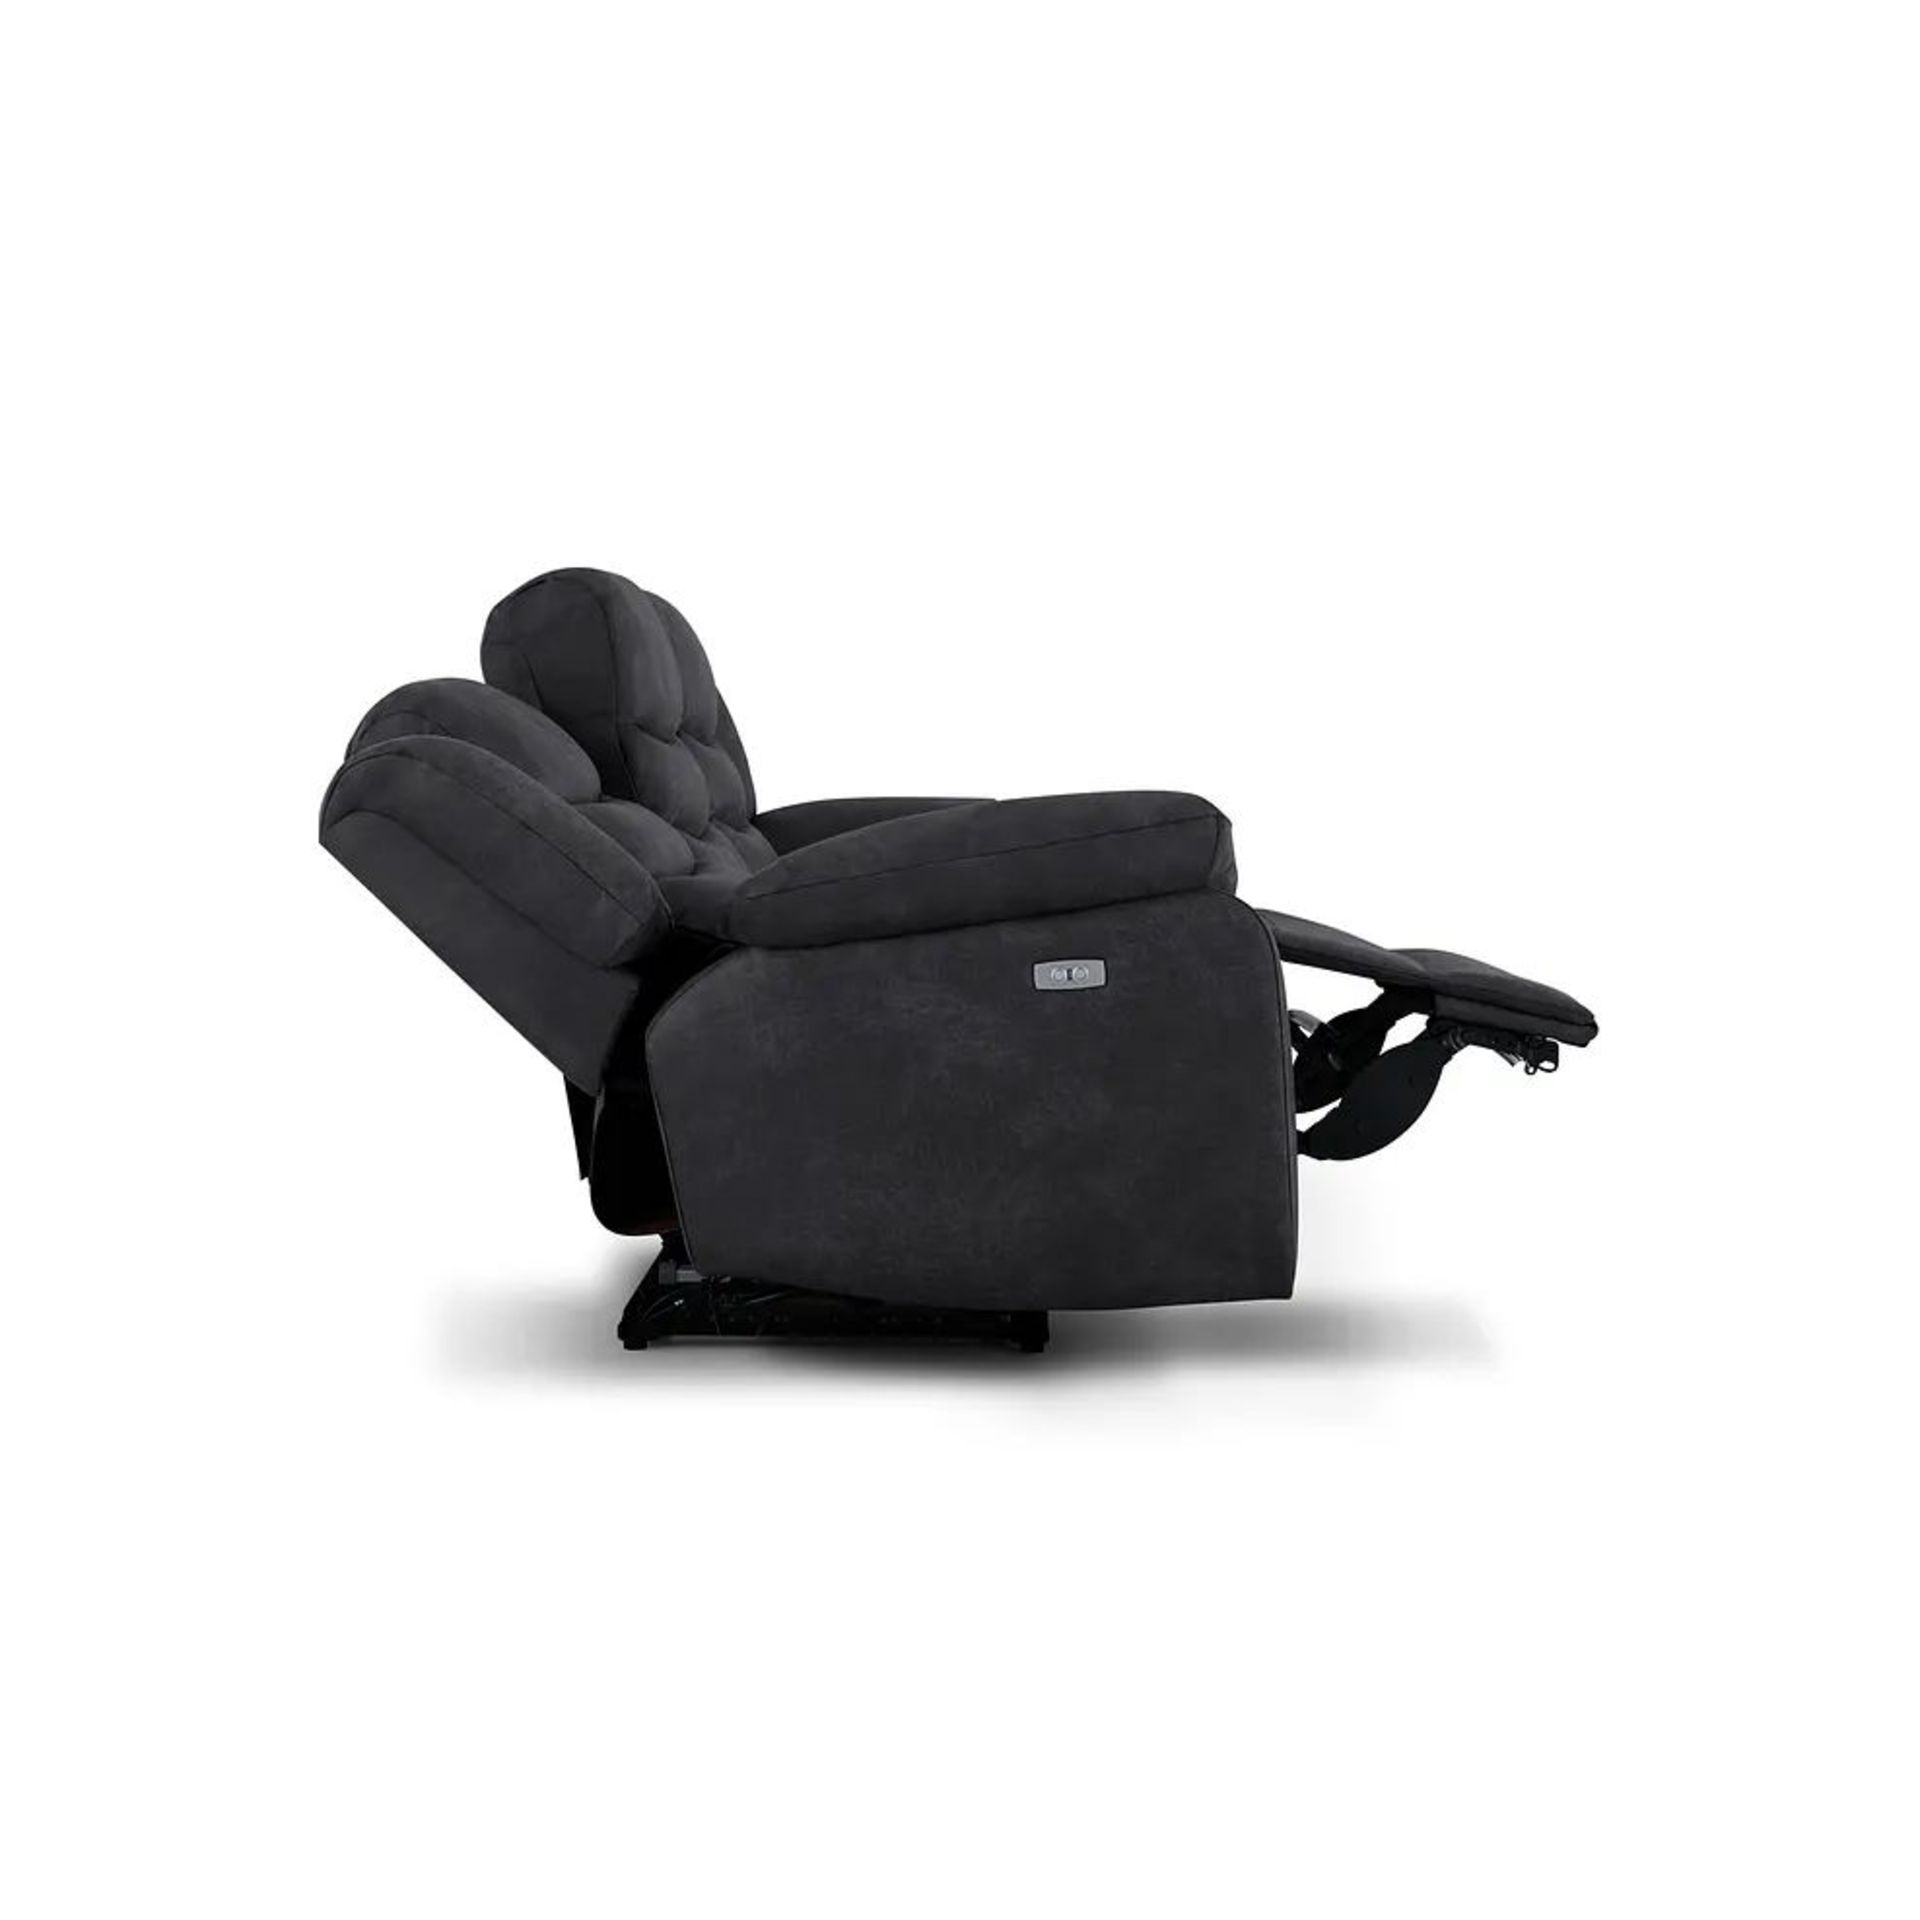 BRAND NEW MARLOW 3 Seater Electric Recliner Sofa - MILLER GREY FABRIC. RRP £1199. Designed to suit - Image 8 of 12